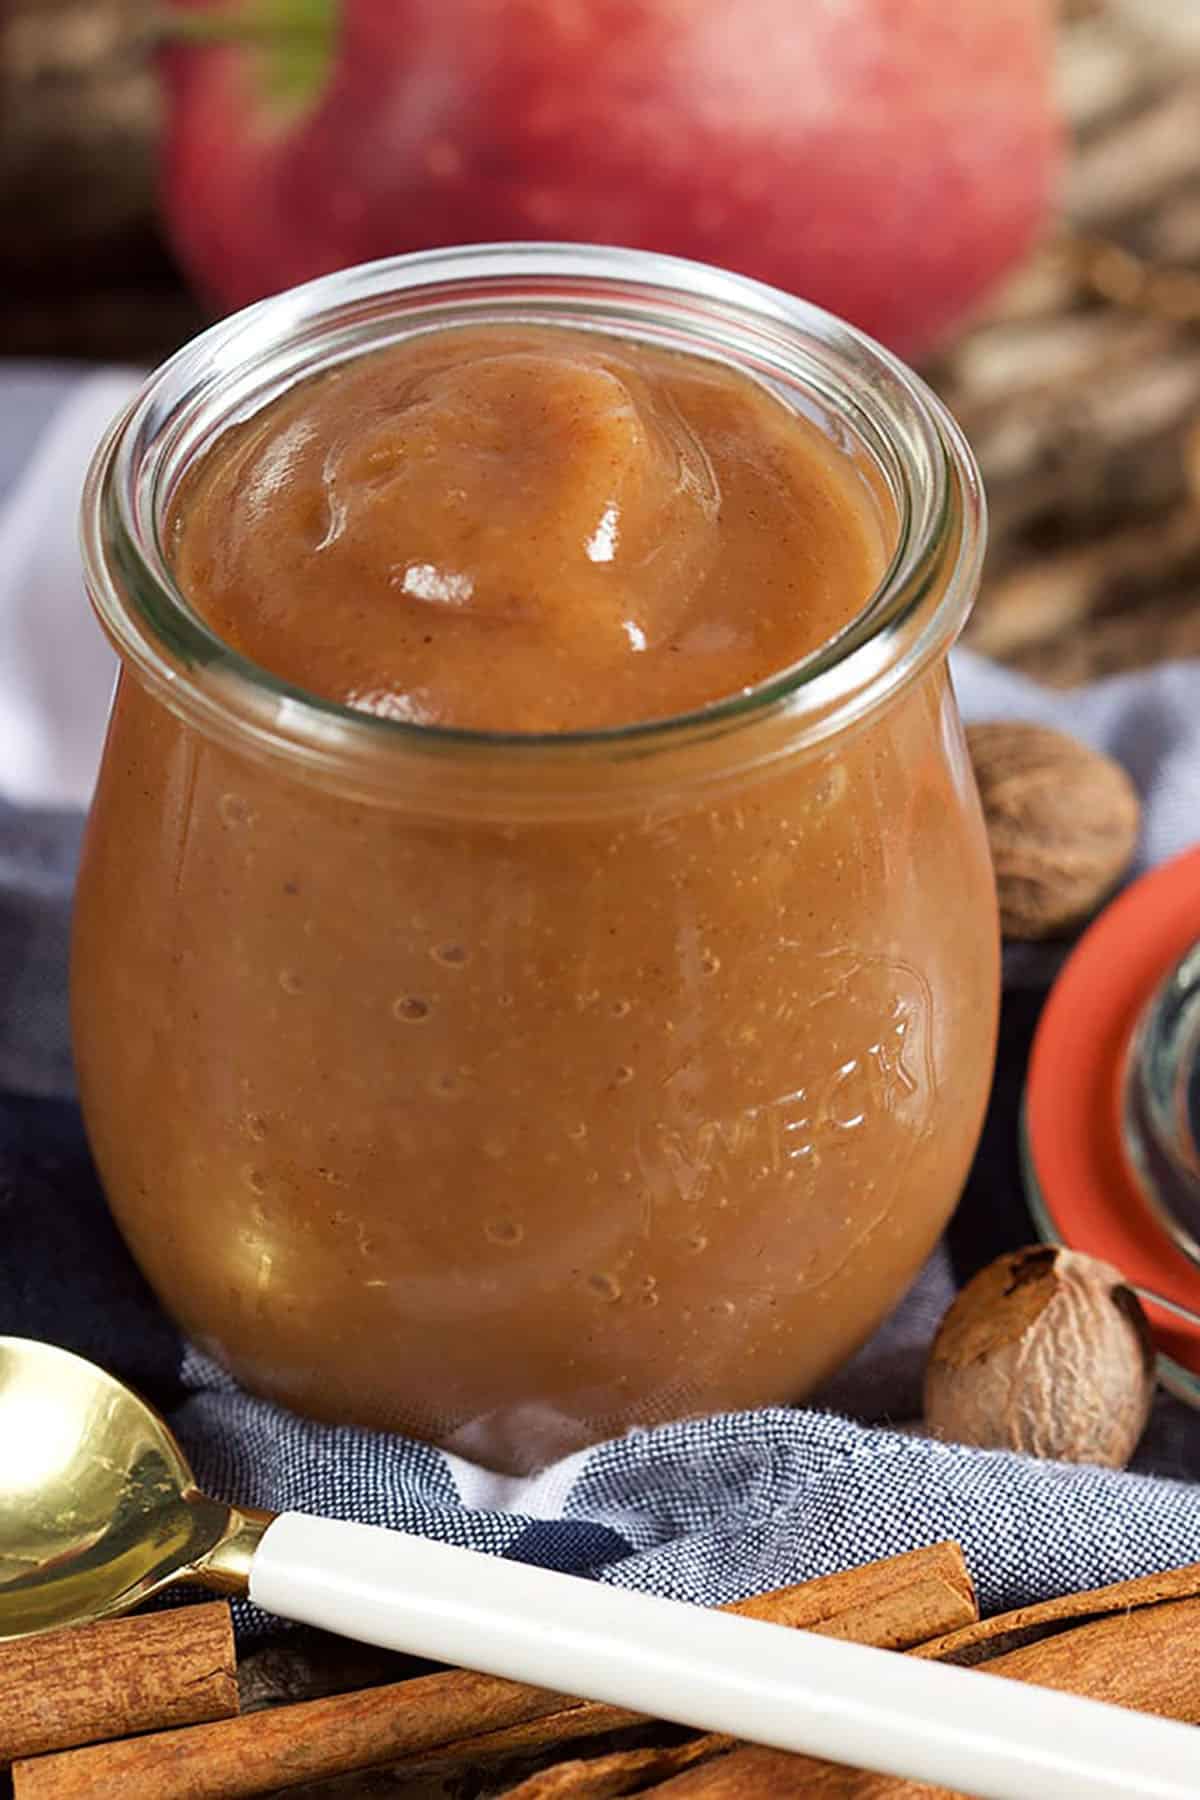 apple butter in a jar with a blue napkin underneath and a white spoon in front of it.